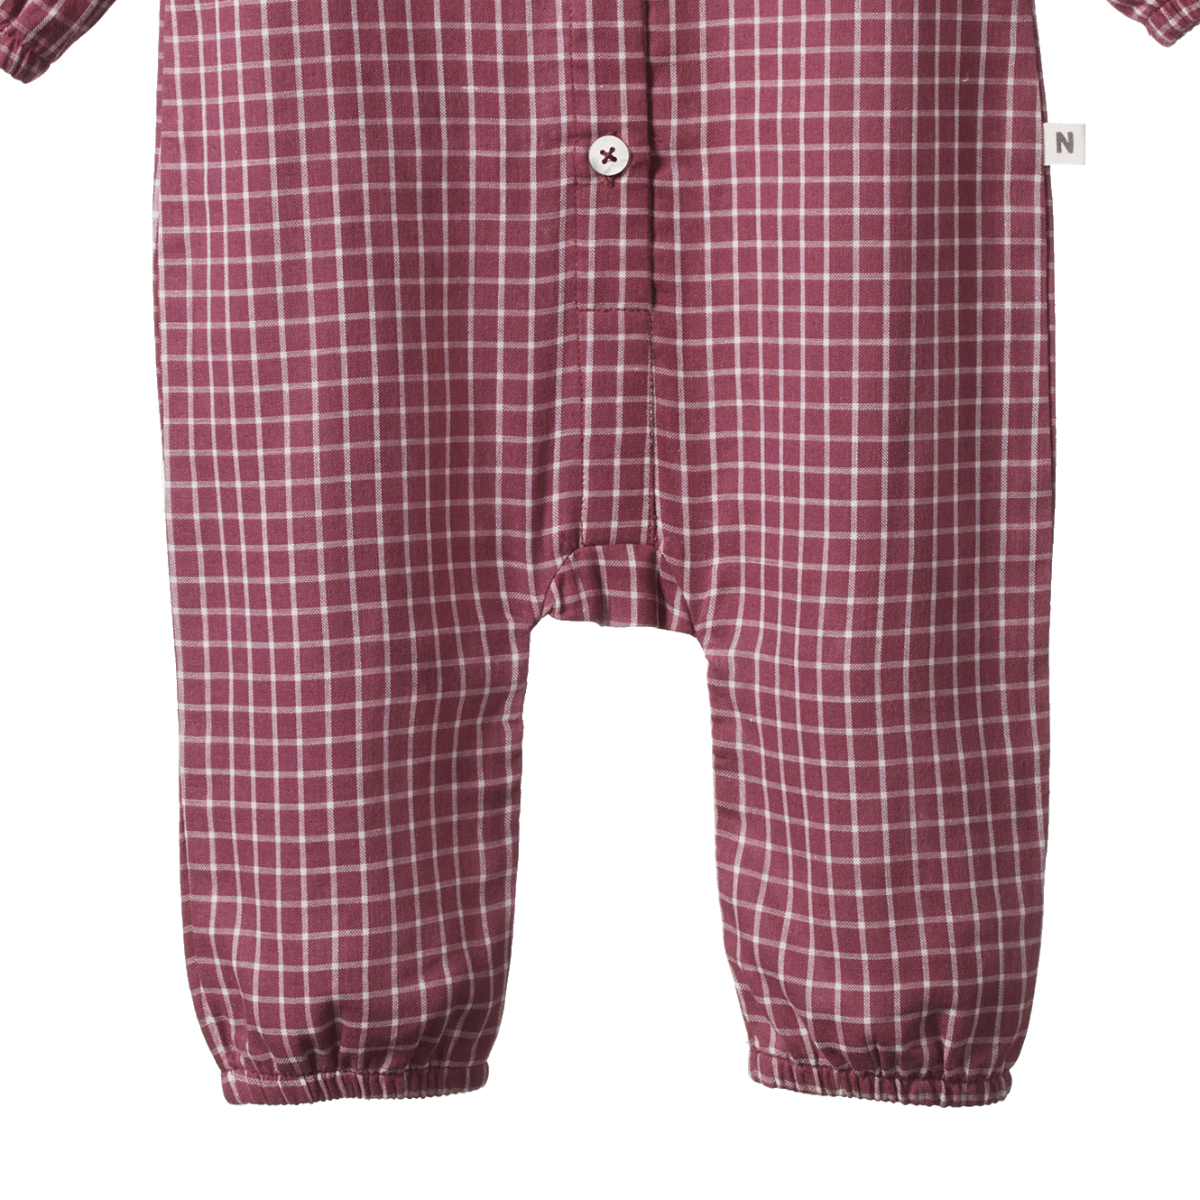 Darcy Suit - Rhubarb Check